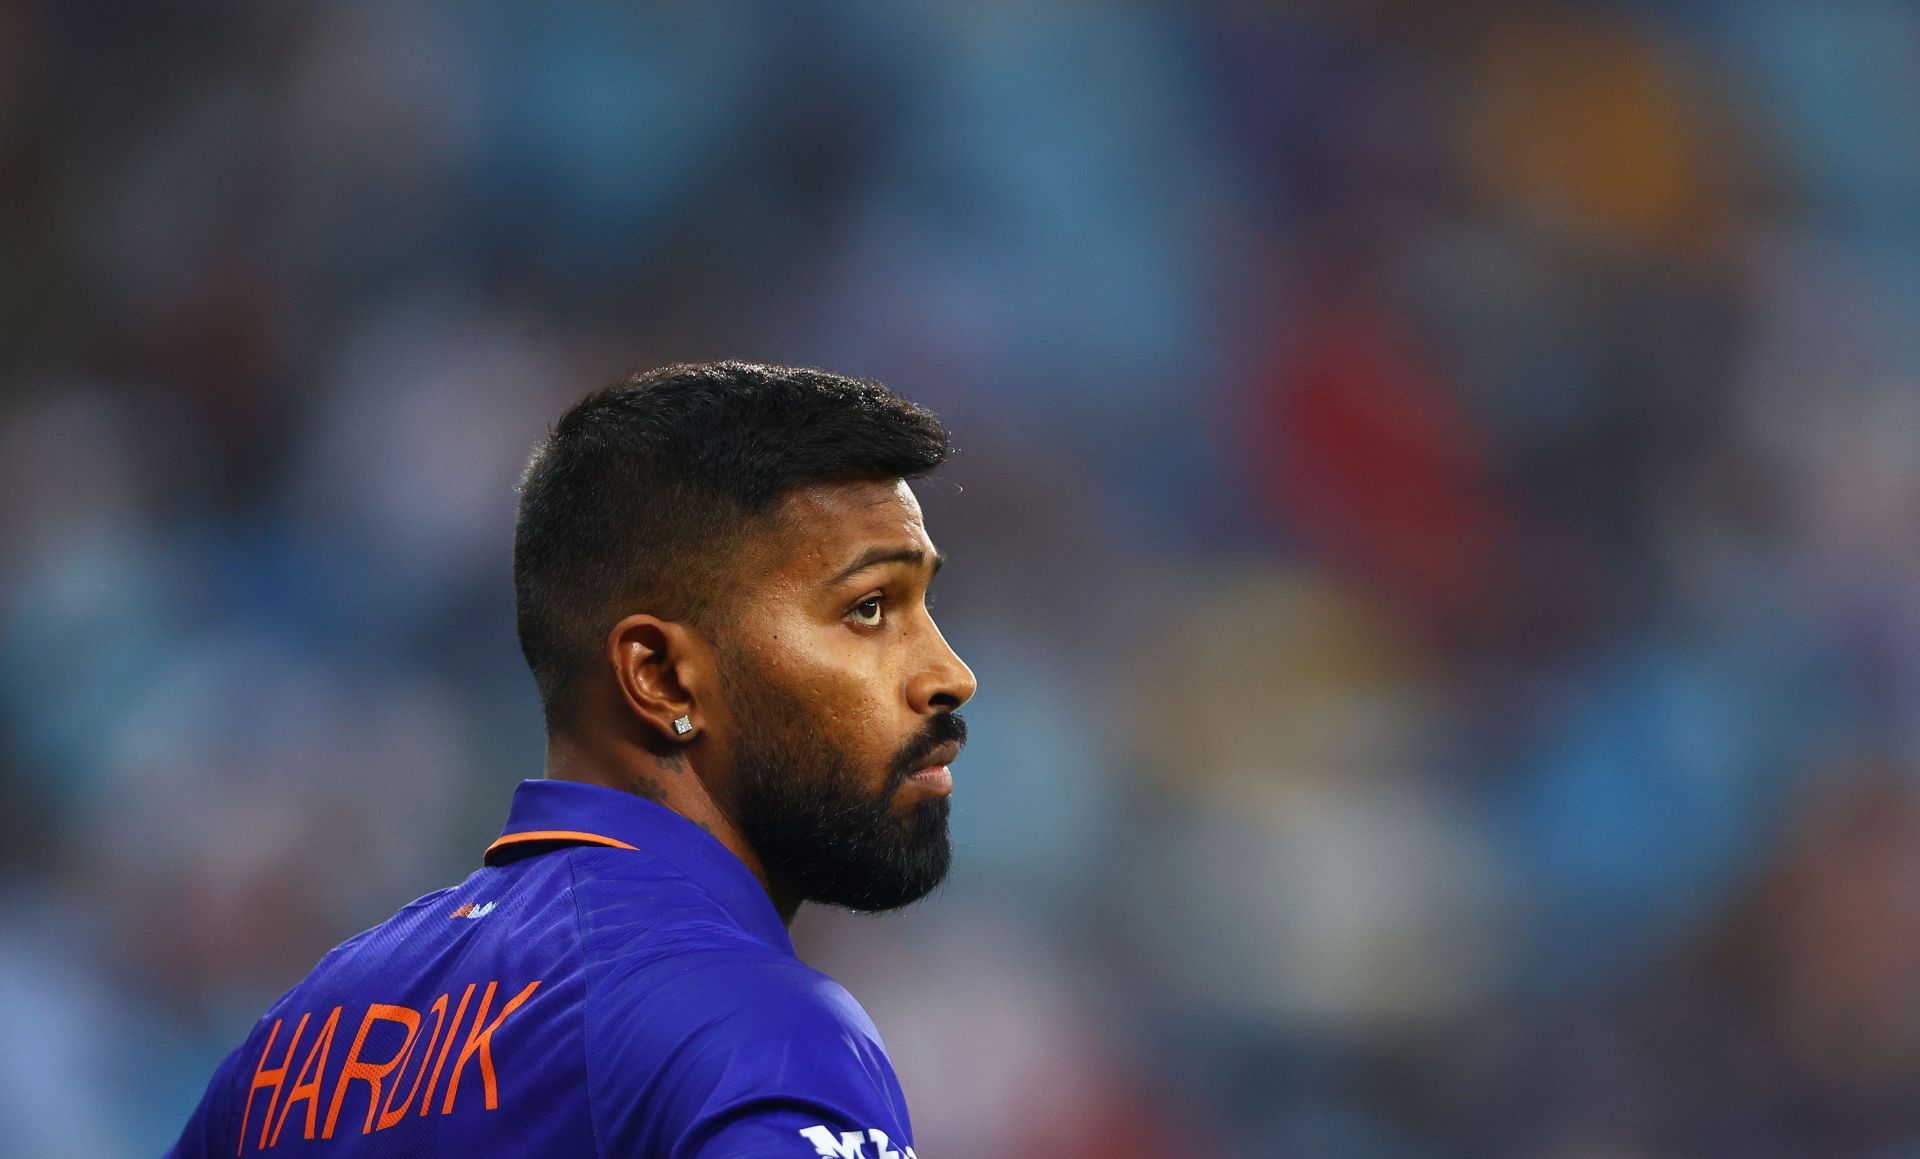 Hardik Pandya barely bowled for the Indian cricket team at the T20 World Cup